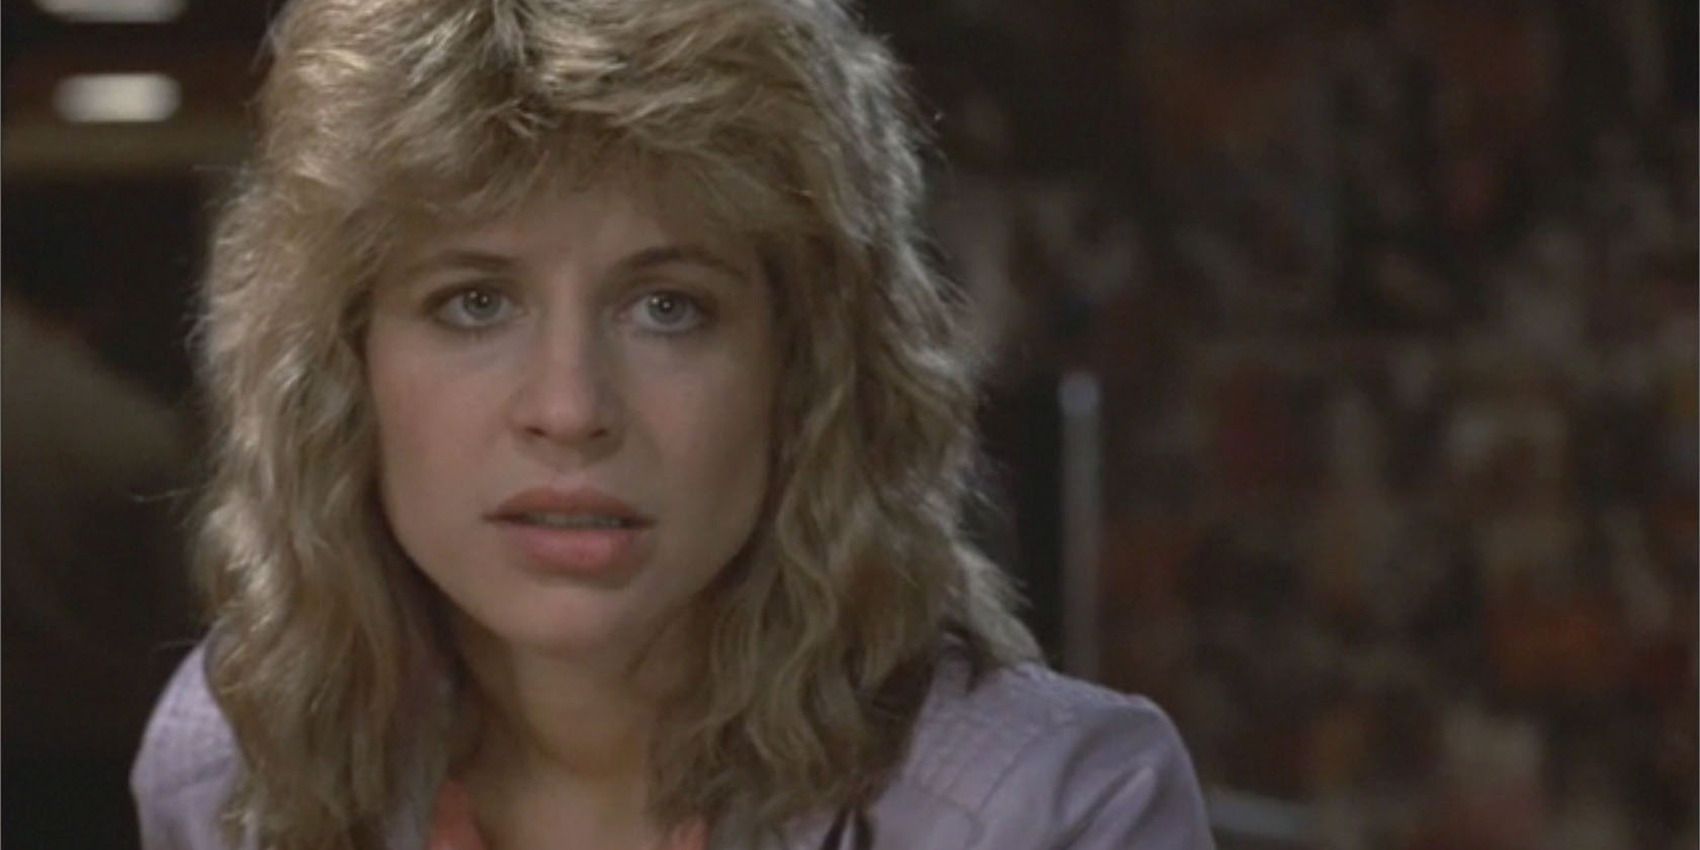 Sarah Connor looking concerned in 'The Terminator'